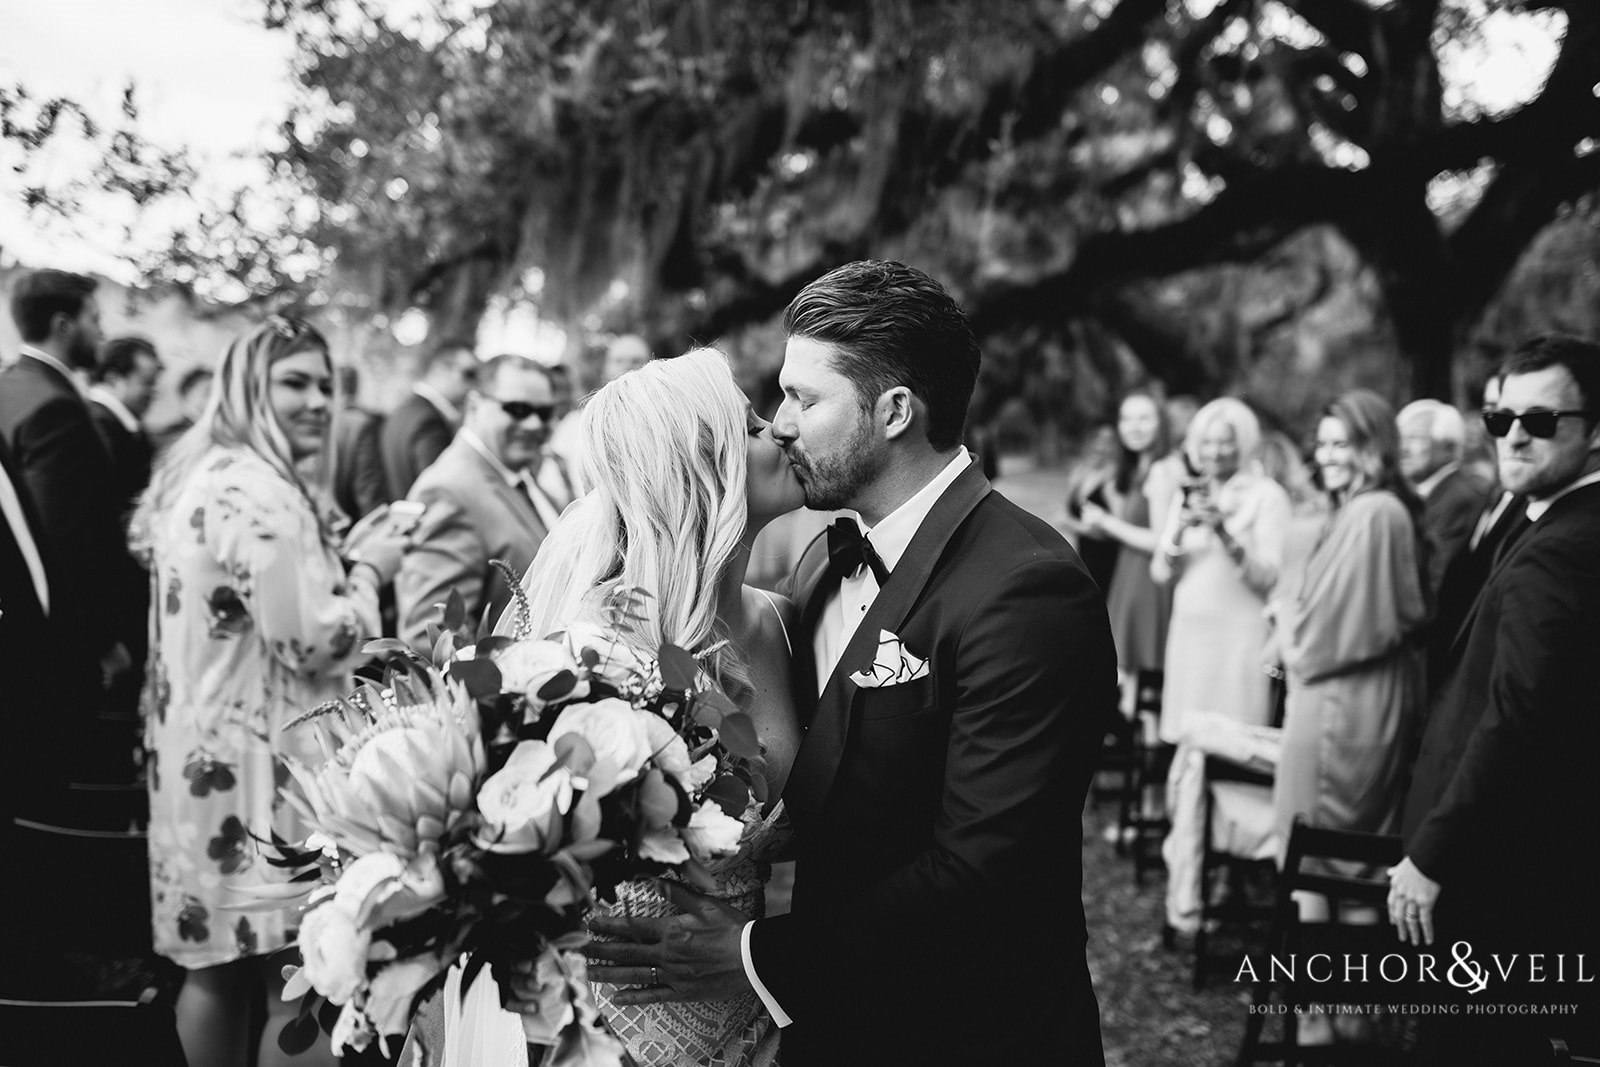 The bride and groom kiss after walking down the aisle as "man and wife" at the Boone Hall Plantation Wedding 